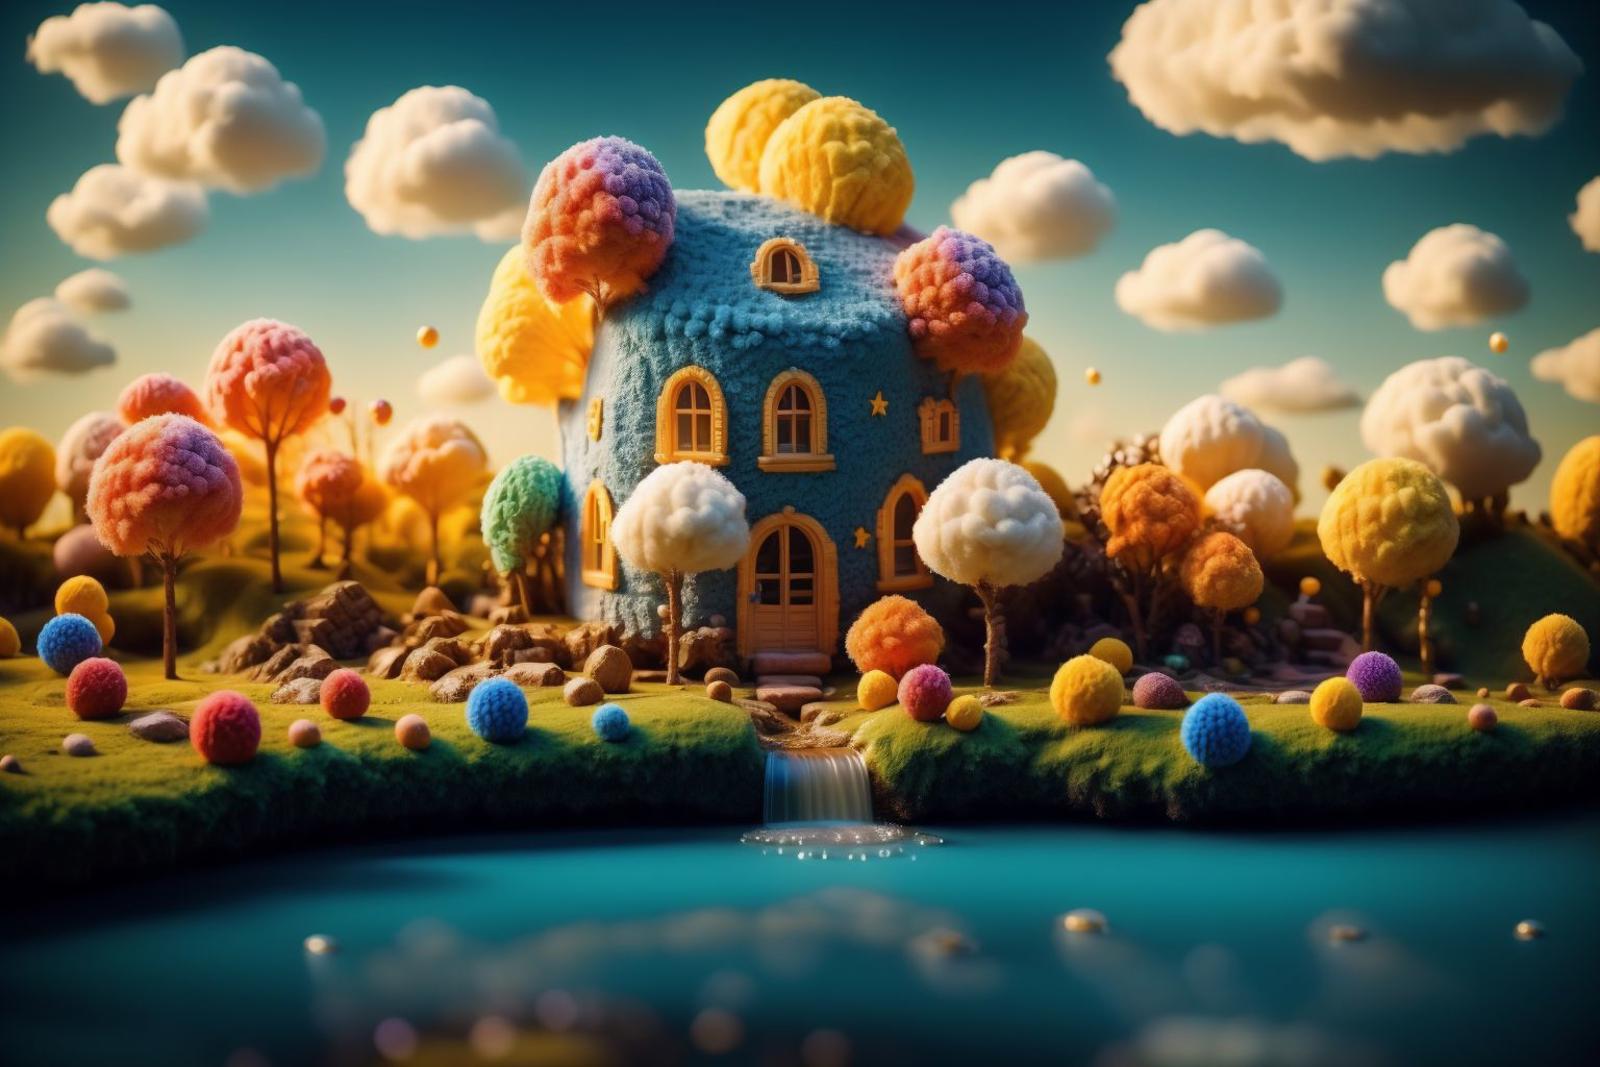 CANDYLAND image by Mord